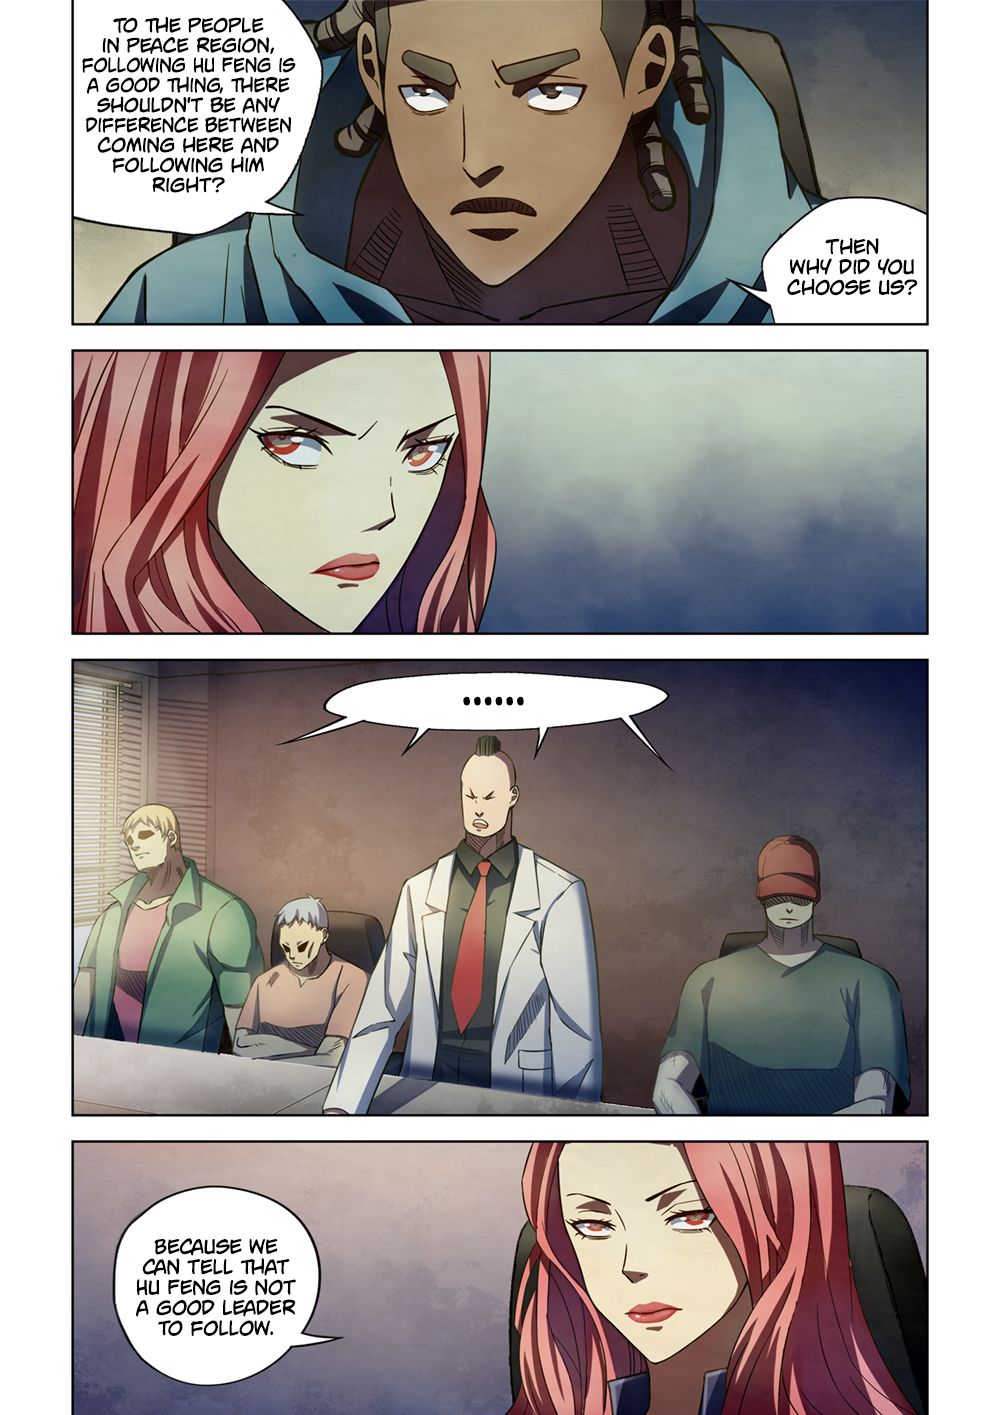 The Last Human Chapter 173 Page 1